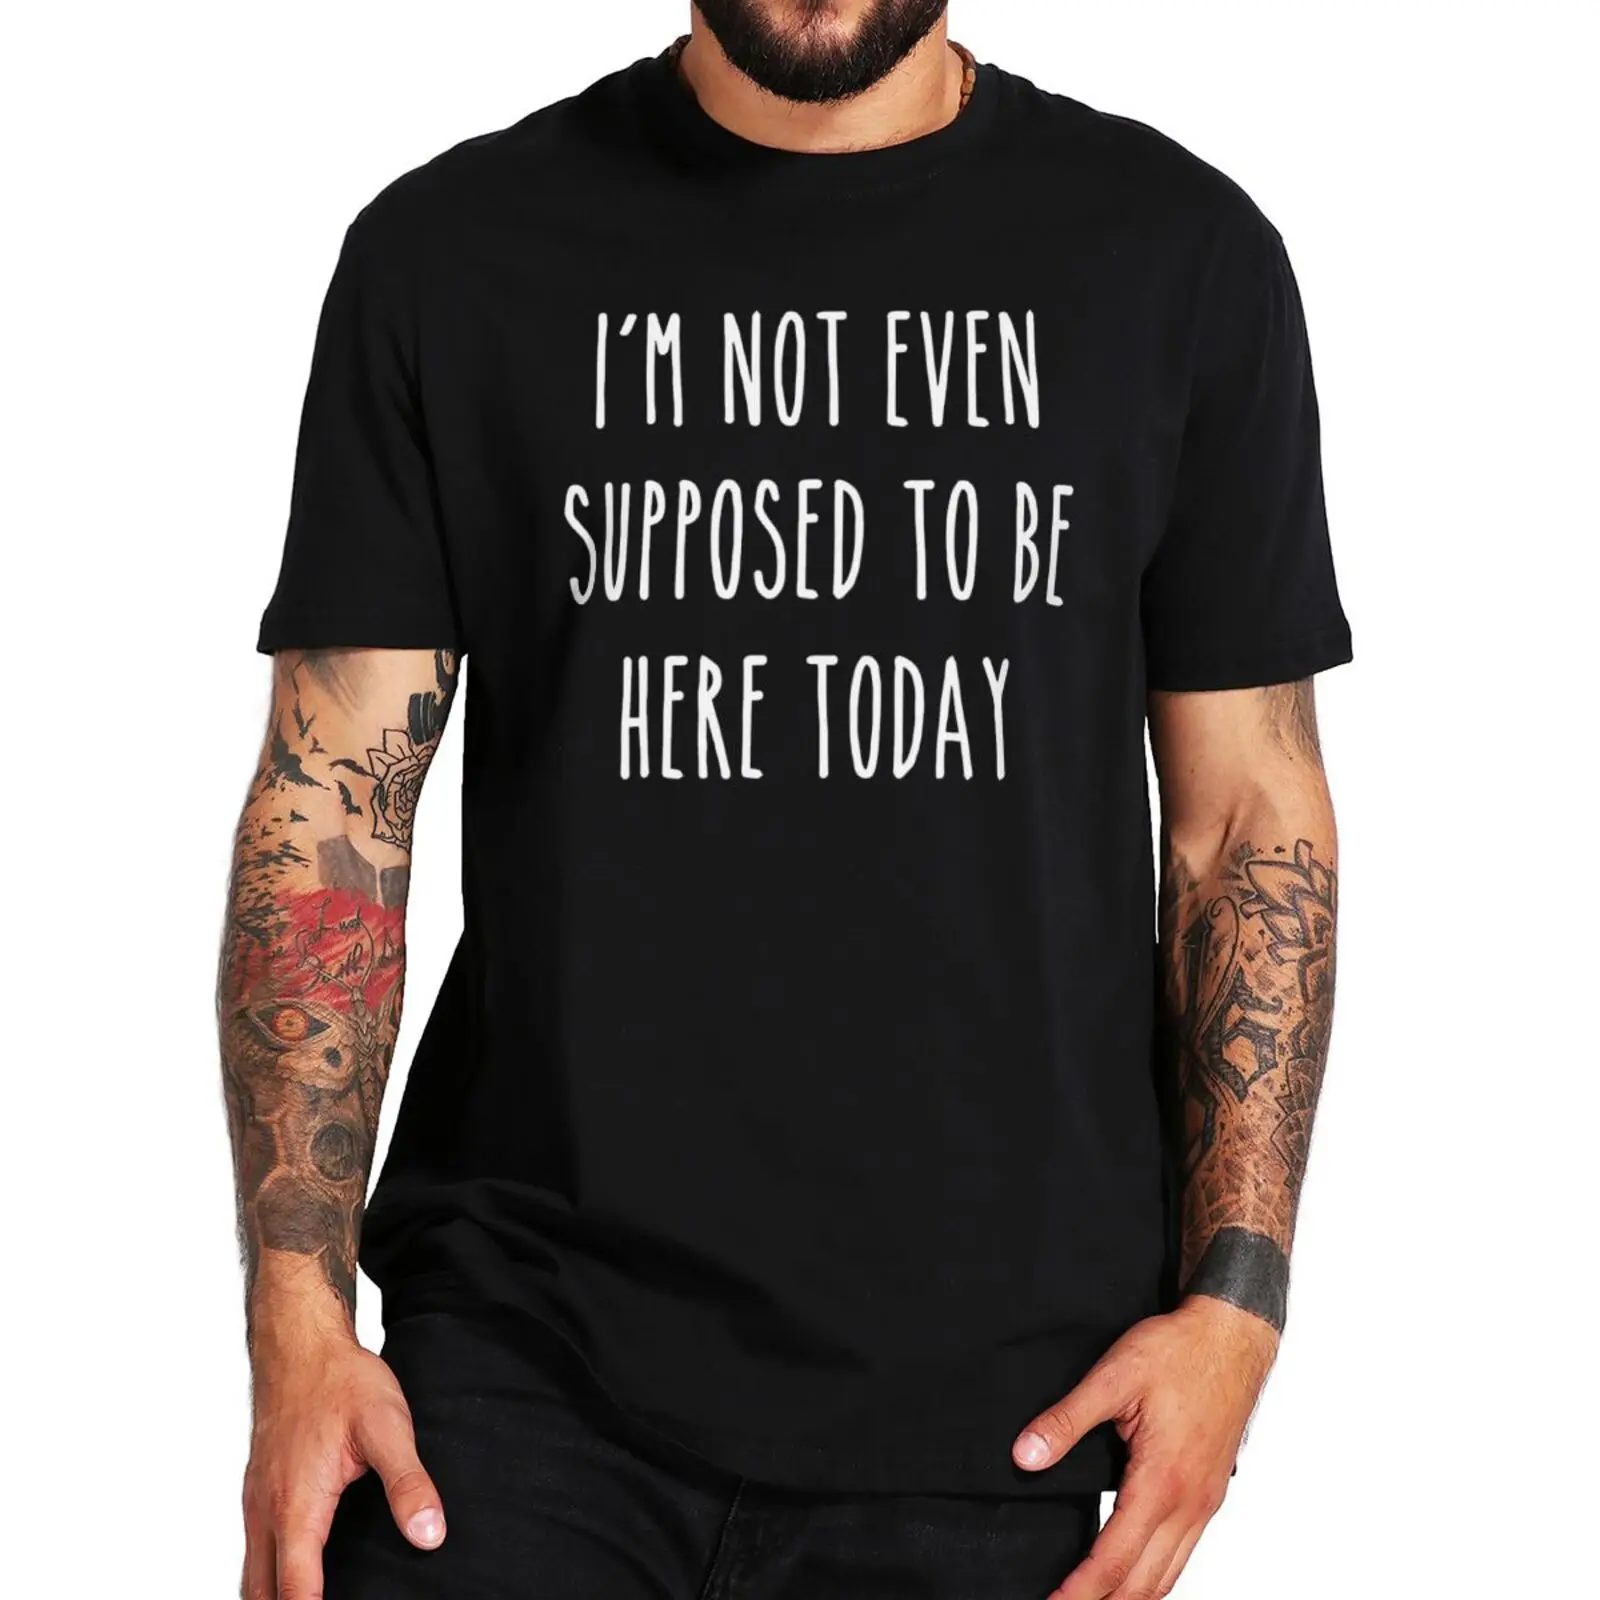 

I'm Not Even Supposed To Be Here Today T-Shirt Funny Sarcastic Saying Humor Joke Gift Tops Soft 100% Cotton Premium T Shirt